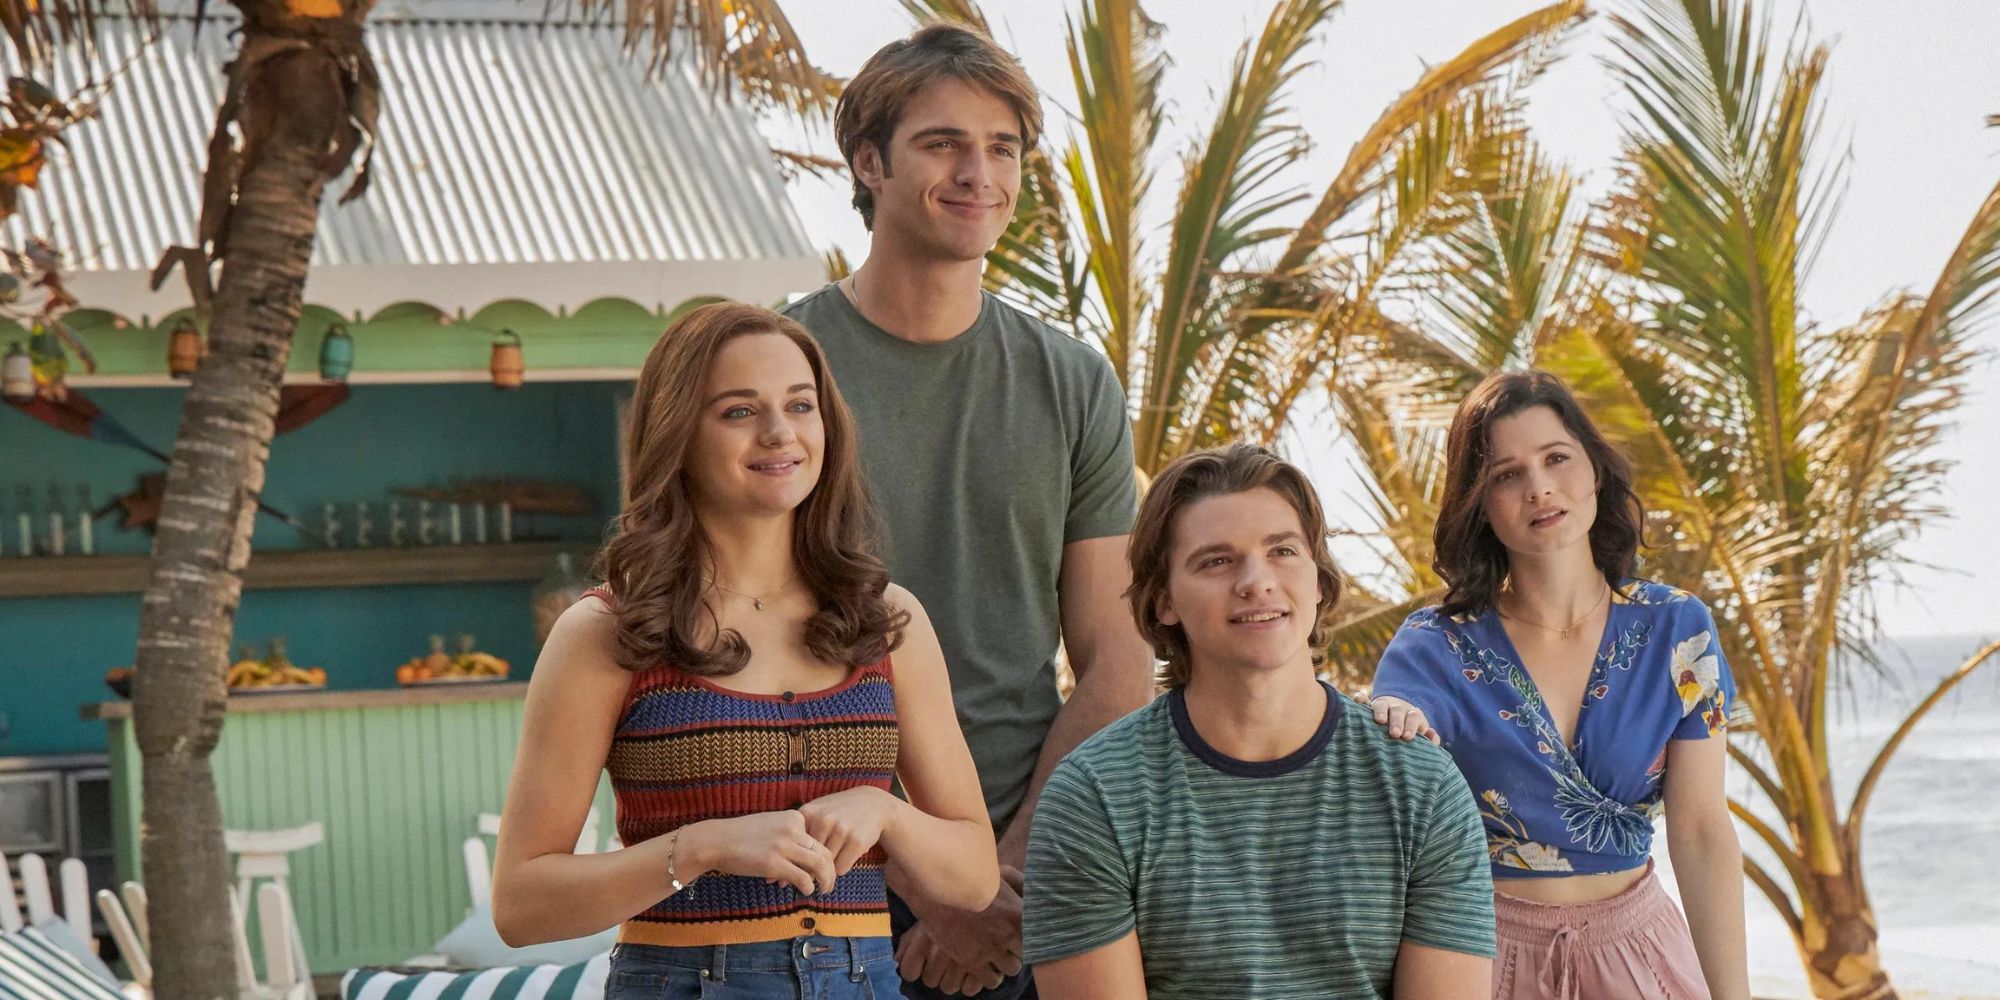 Joey King, Joel Courtney, Jacob Elordi and Meganne Young standing together at the beach